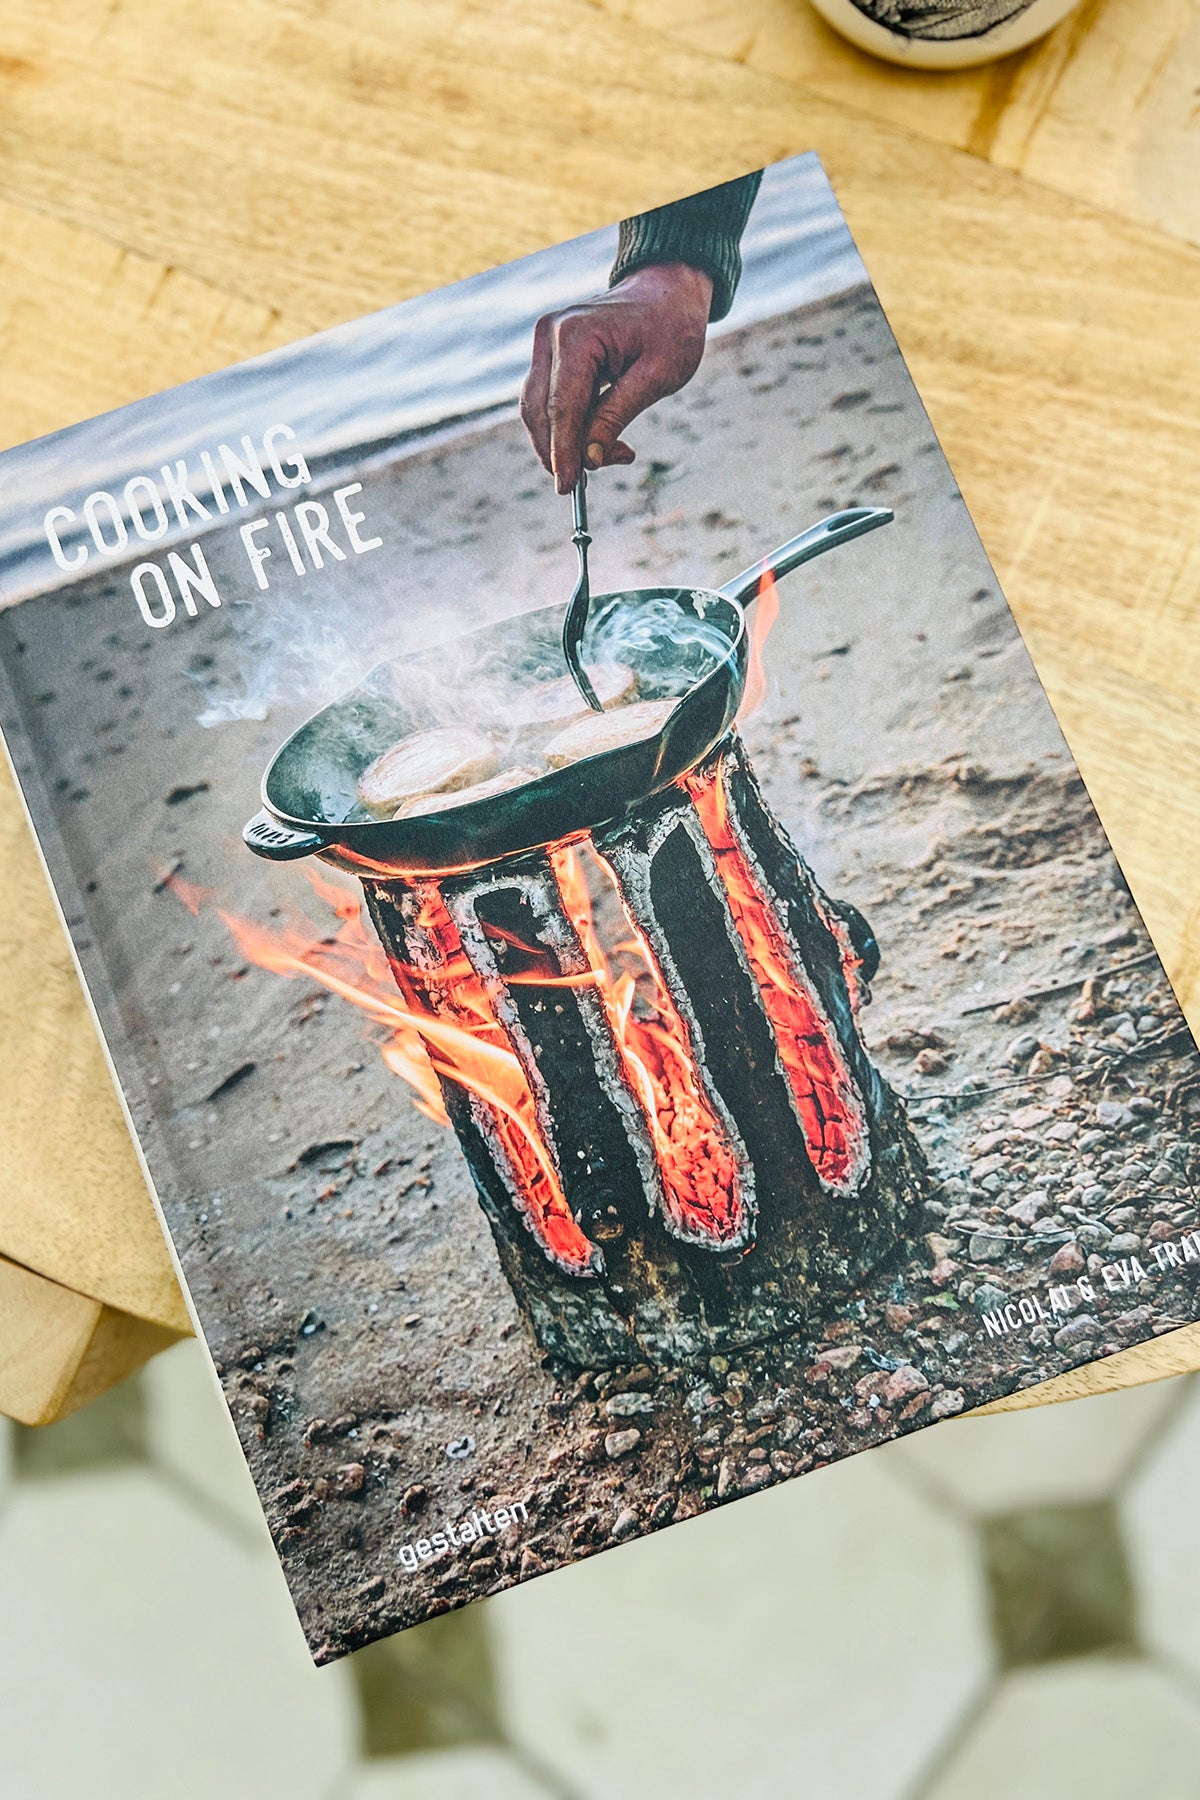 Book "Cooking on Fire"